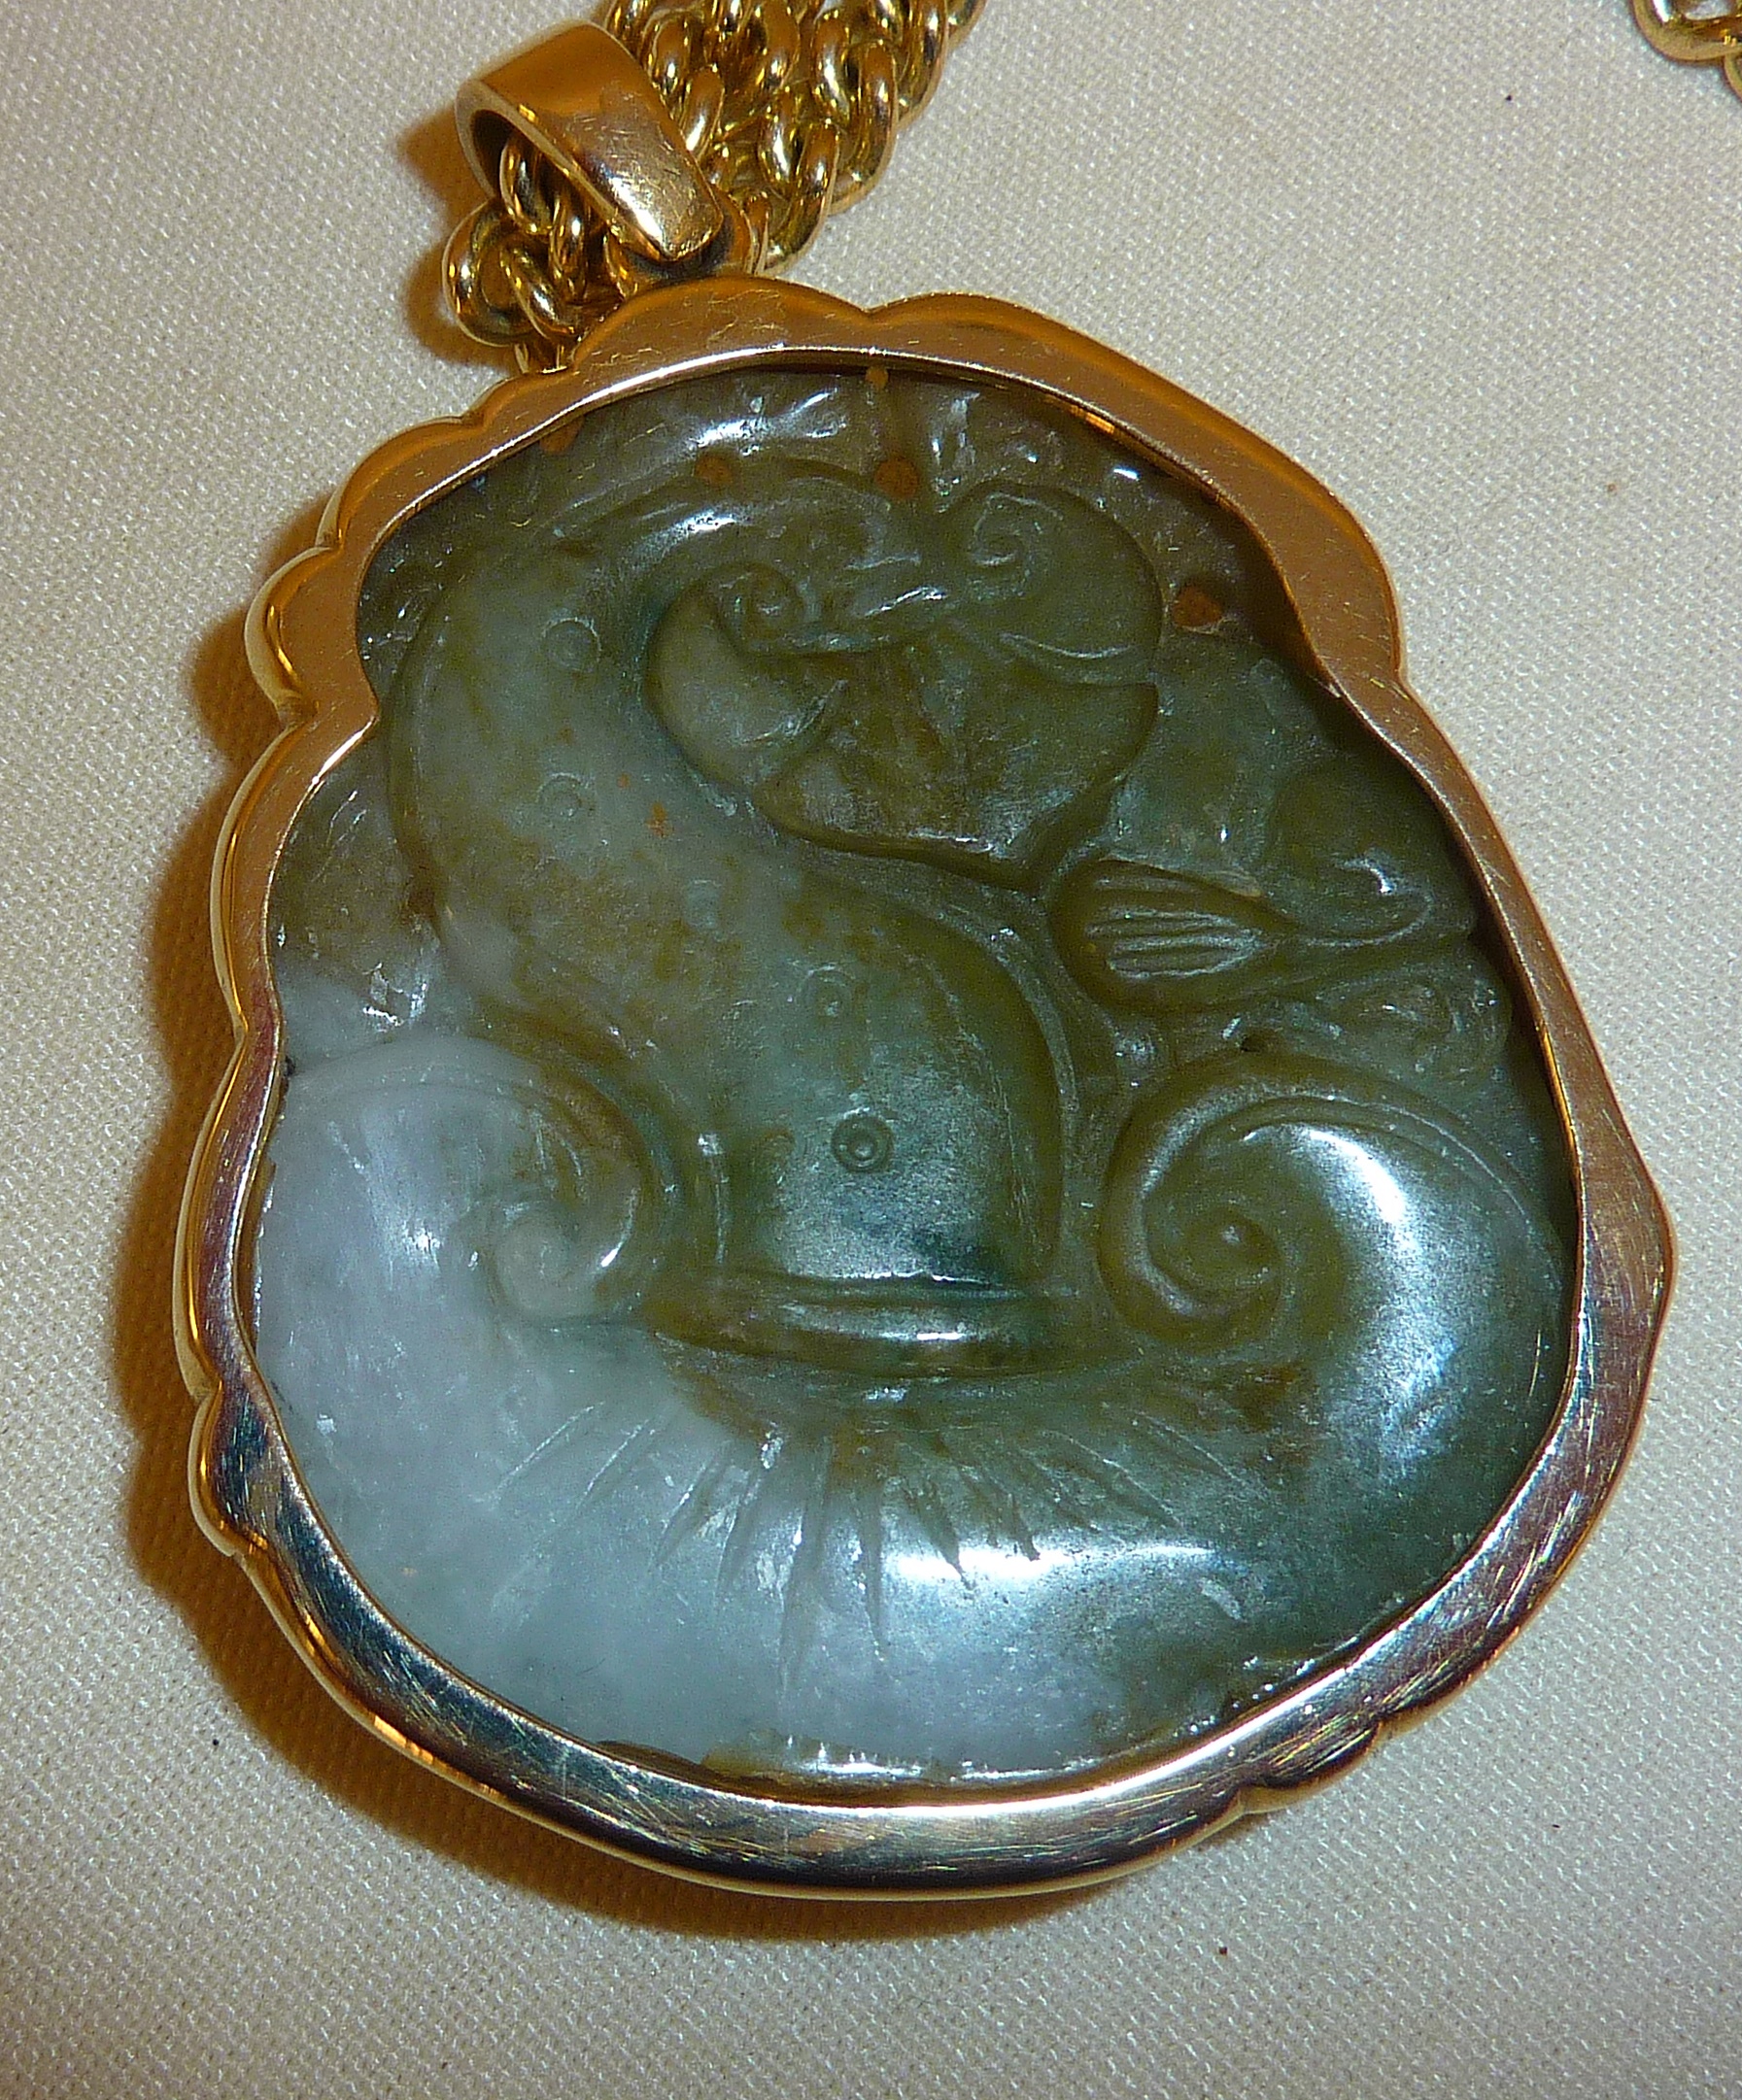 Chinese double-sided carved jade pendant in the form of a monkey on Lingzhi fungus with 9ct gold - Image 2 of 3